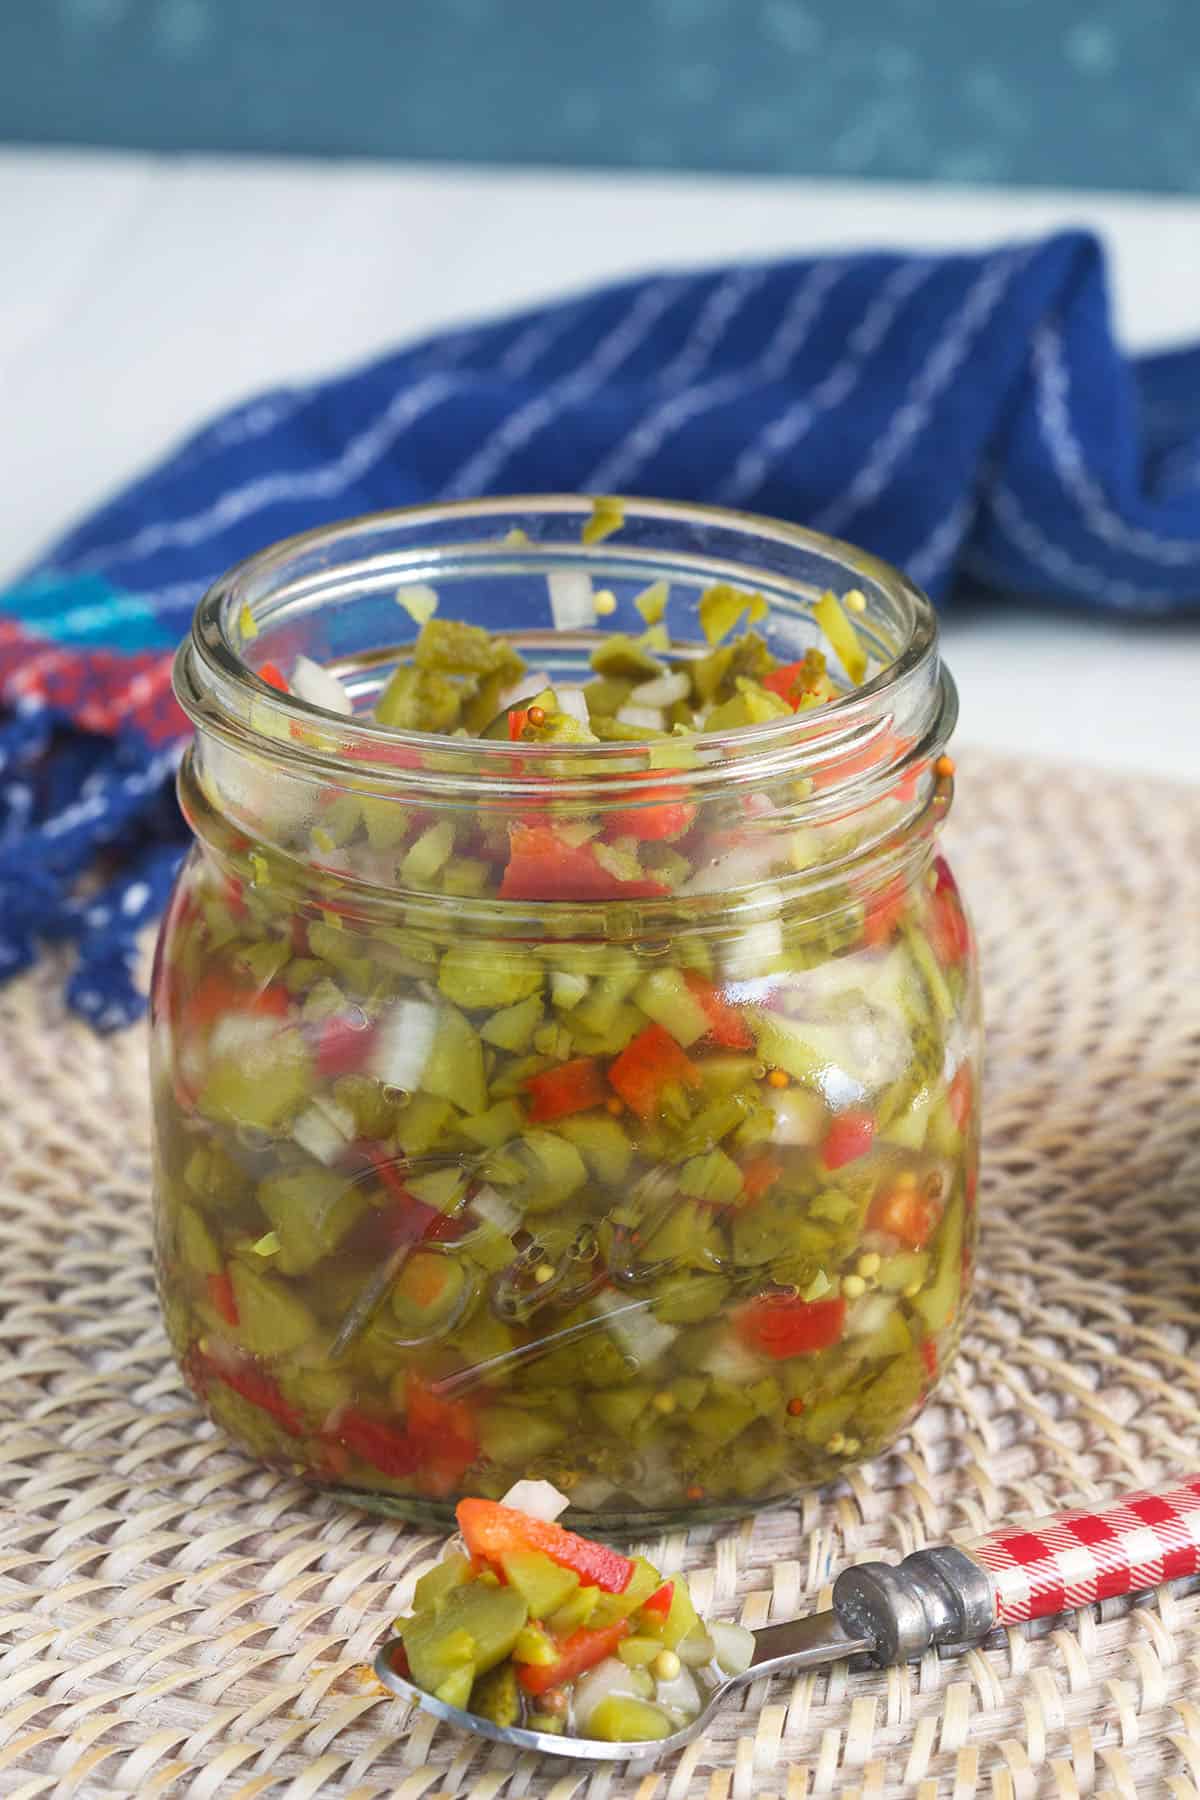 A spoon is placed next to a full jar of relish. 